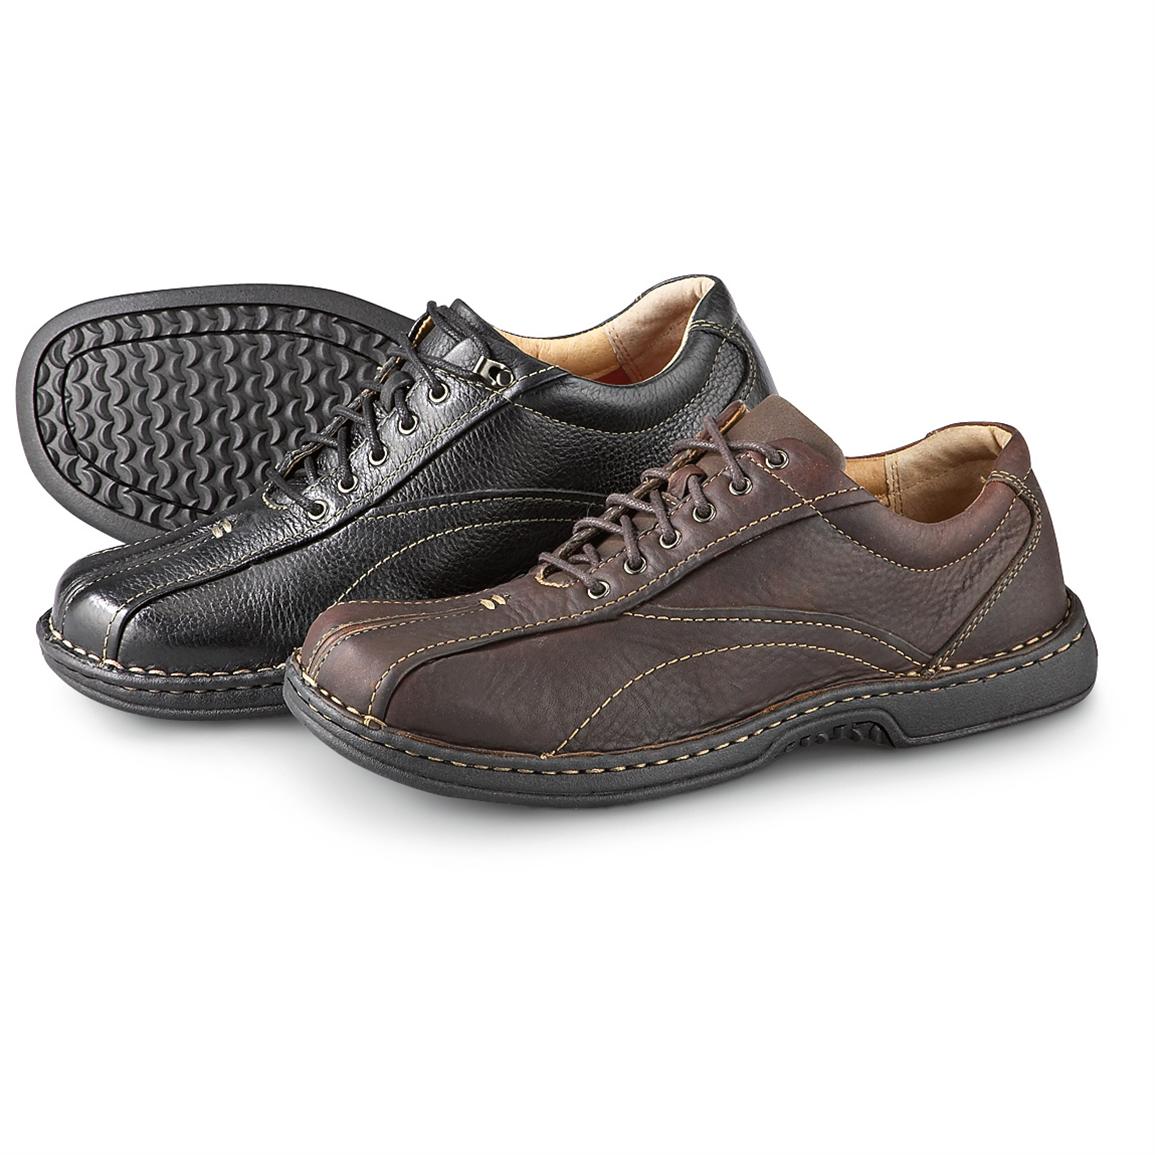 Men's Clarks® Nebulae Oxfords - 158055, Casual Shoes at Sportsman's Guide